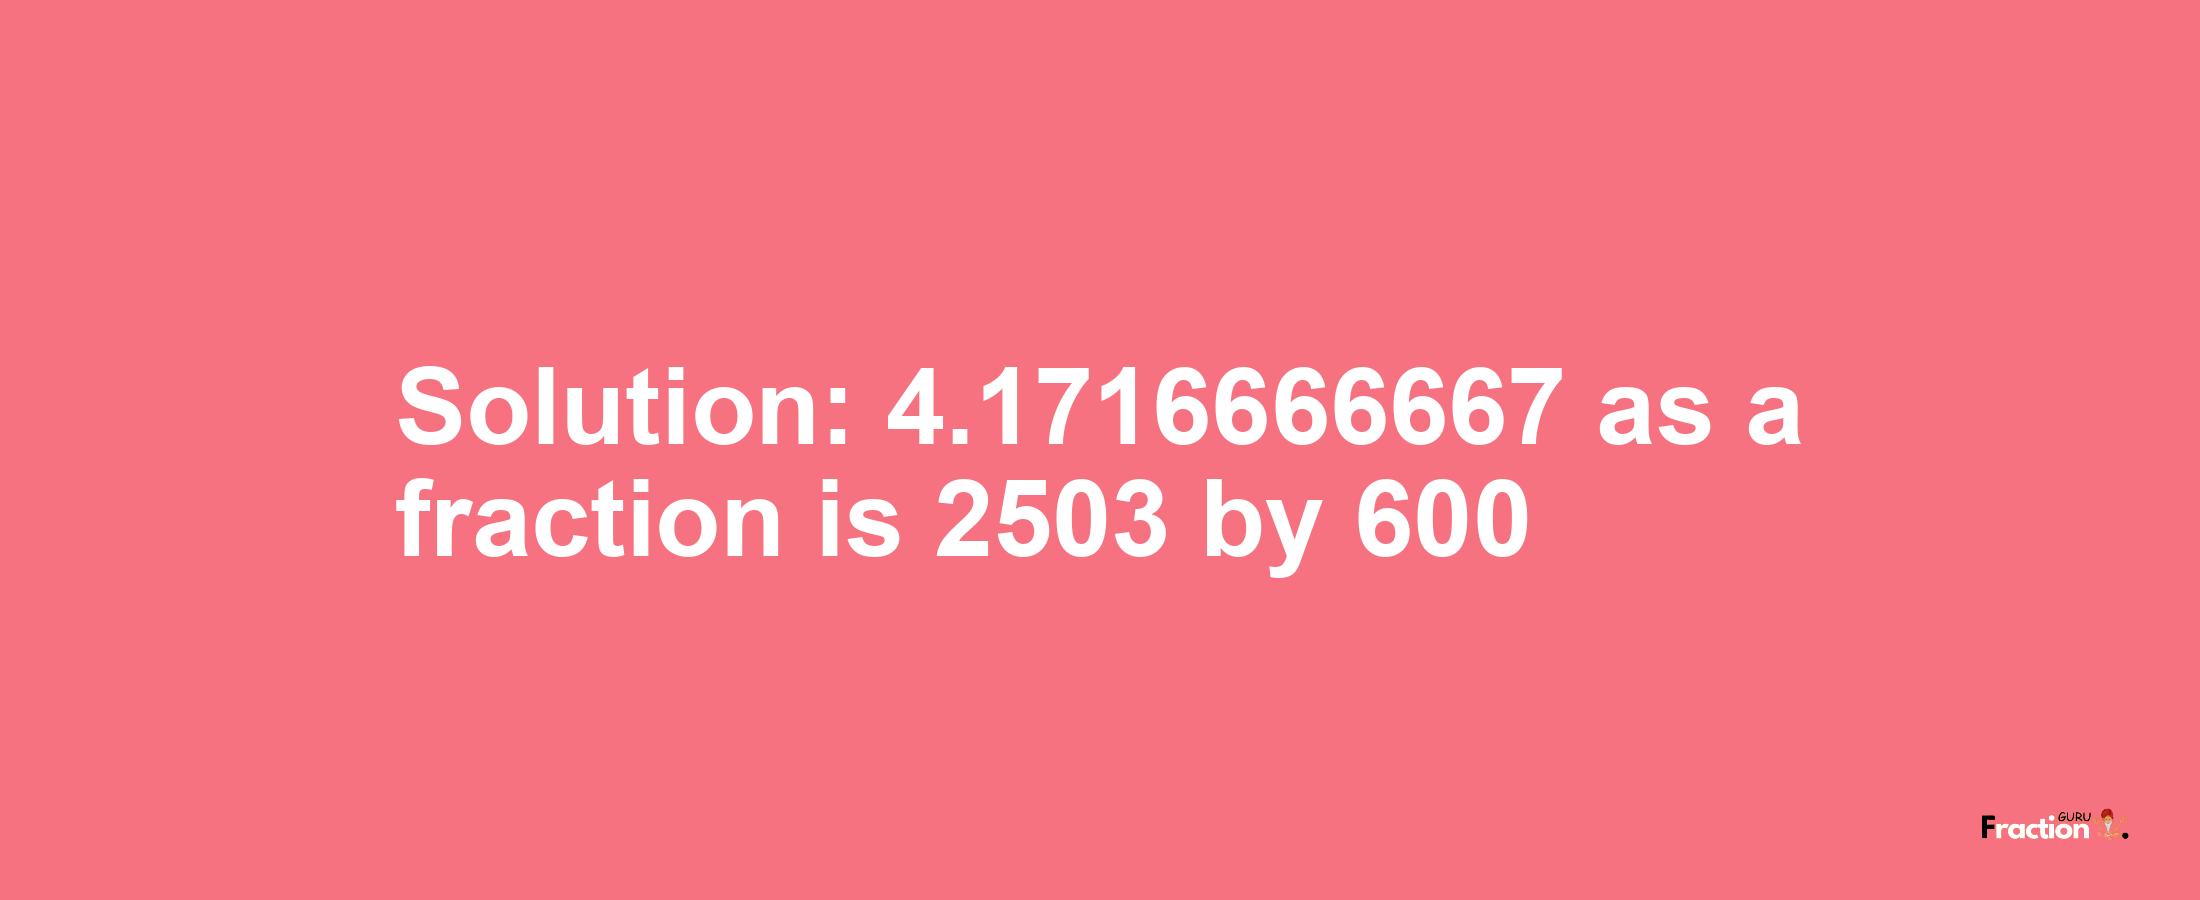 Solution:4.1716666667 as a fraction is 2503/600